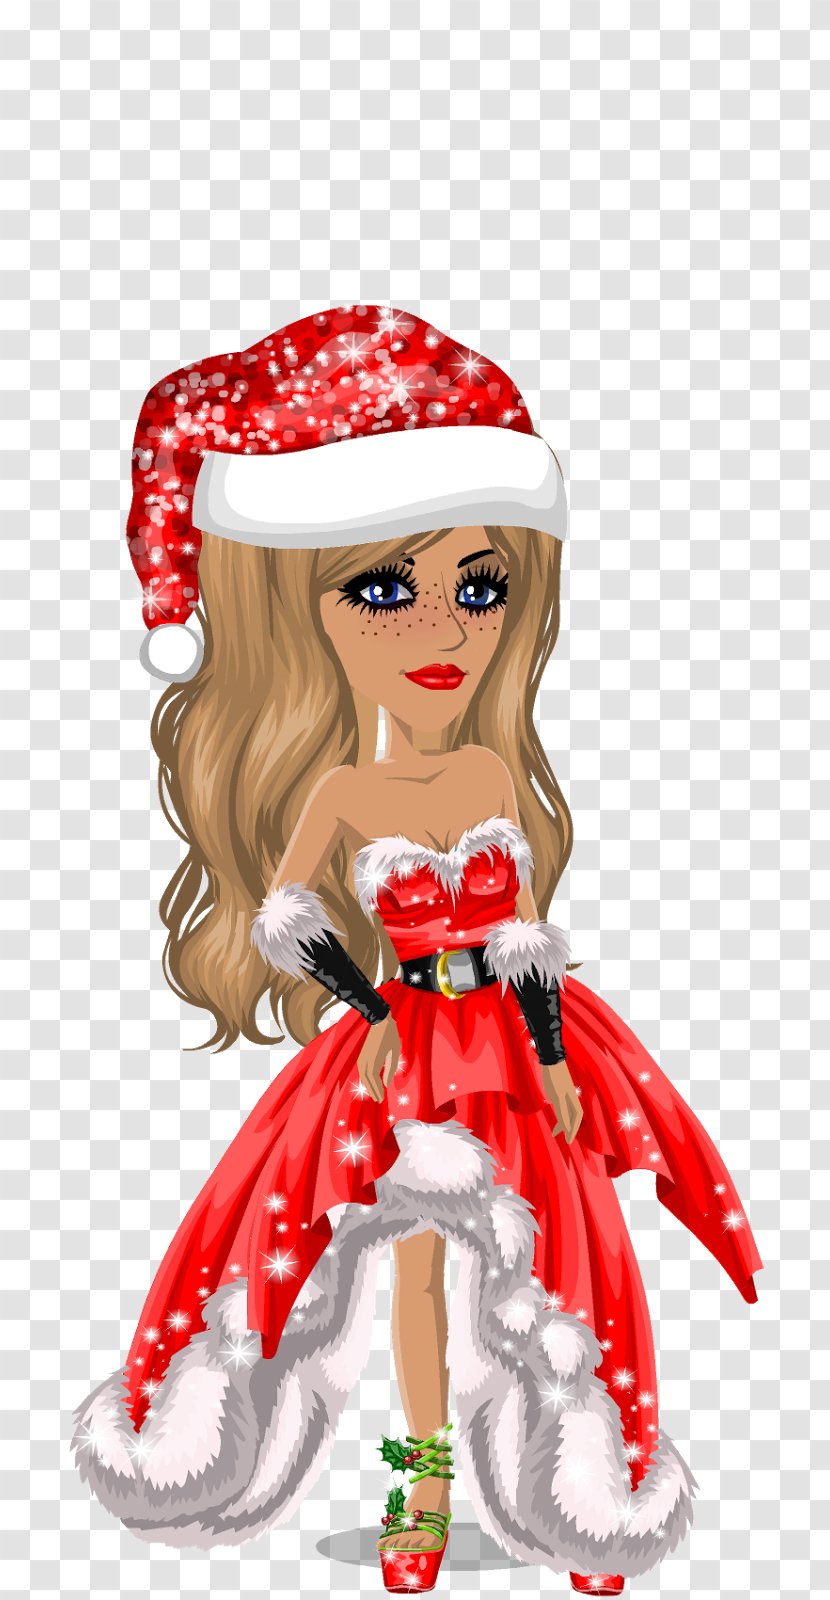 MovieStarPlanet Christmas Ornament Blog - Animation - Outfit Transparent PNG